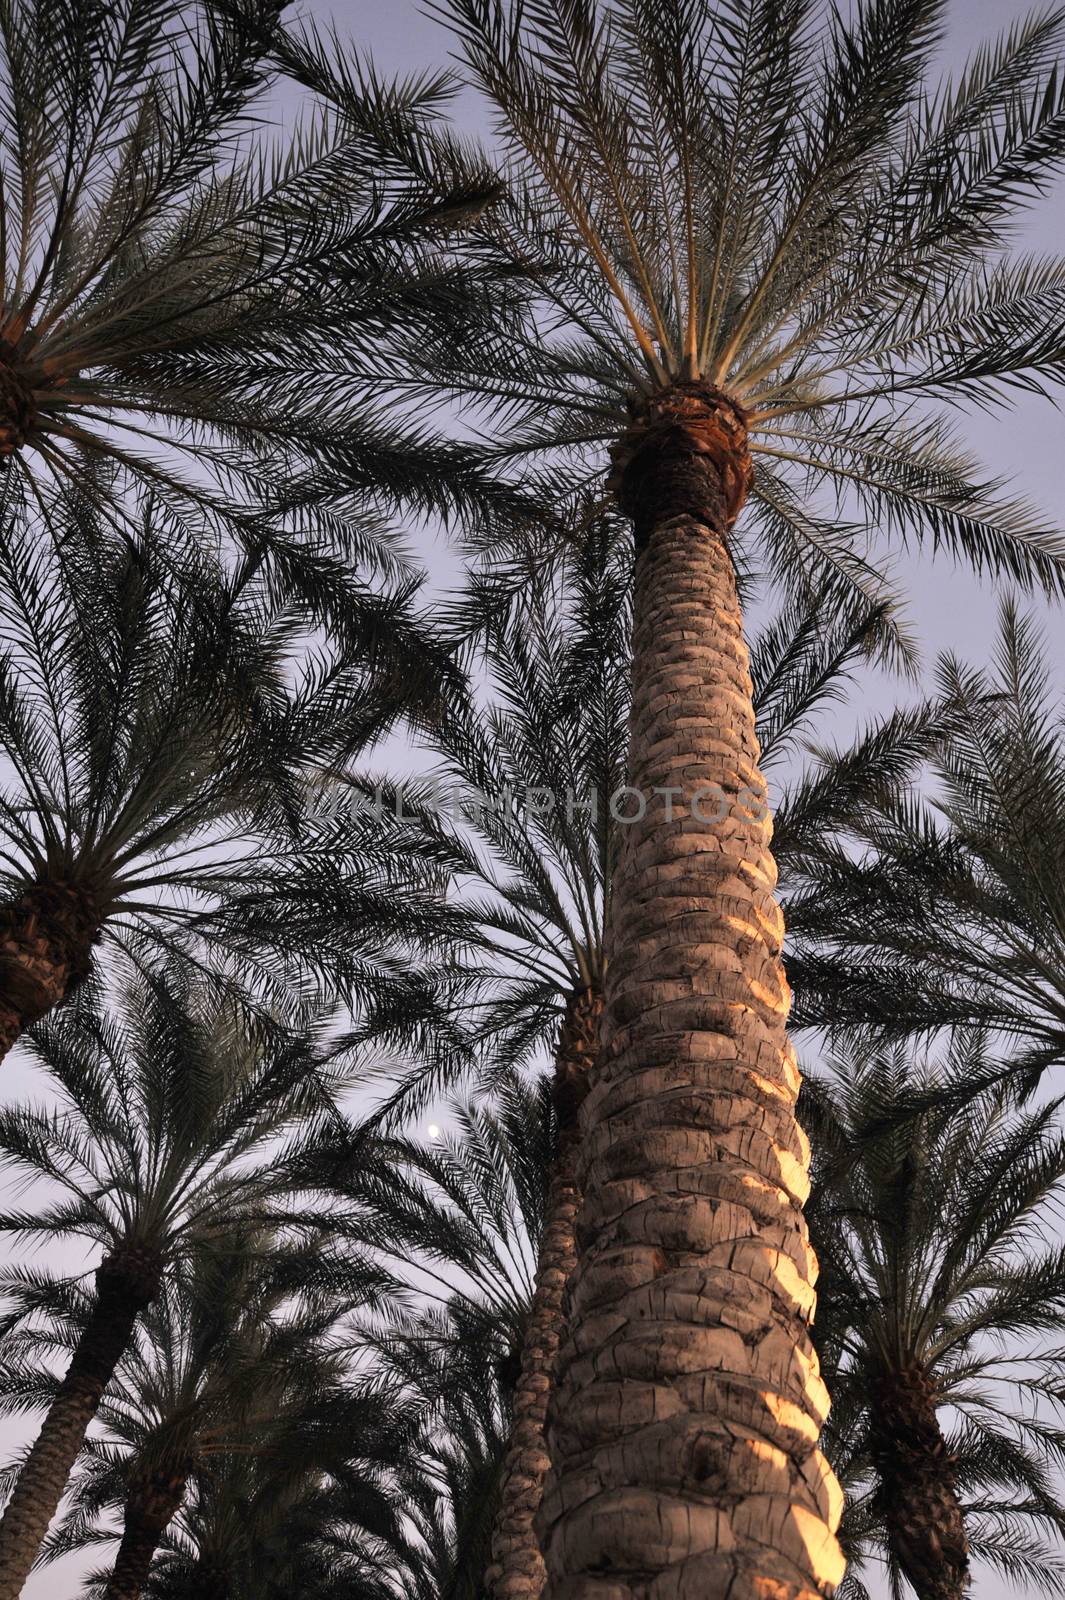 Palm Trees at dusk by gregory21